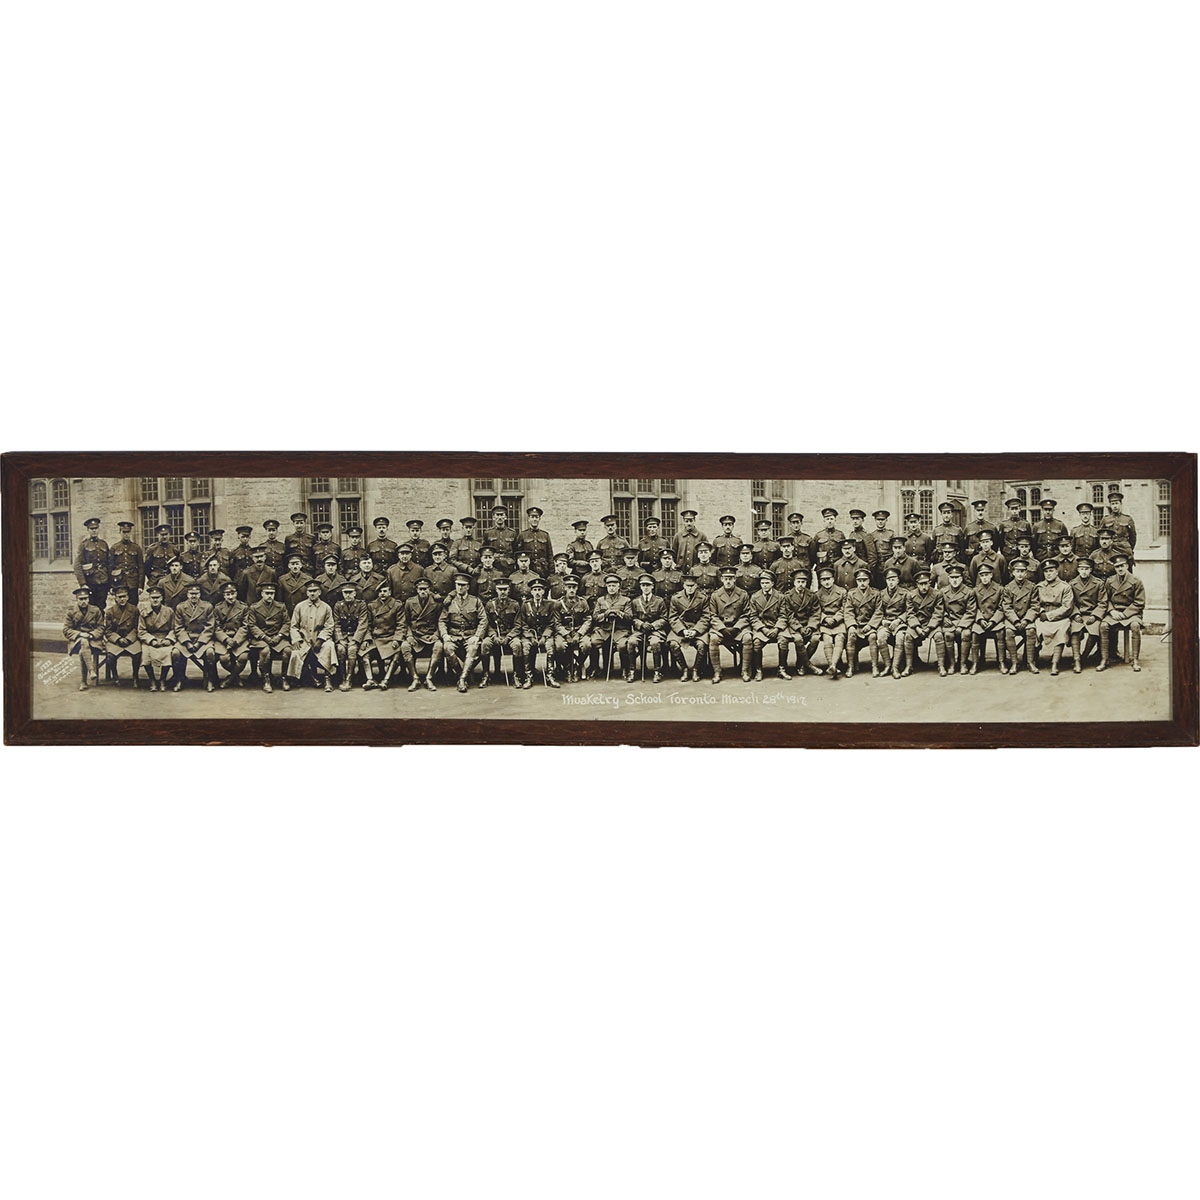 Panoramic Albumin Print Photograph of the ‘Musketry School, Toronto, March 28th, 1917’